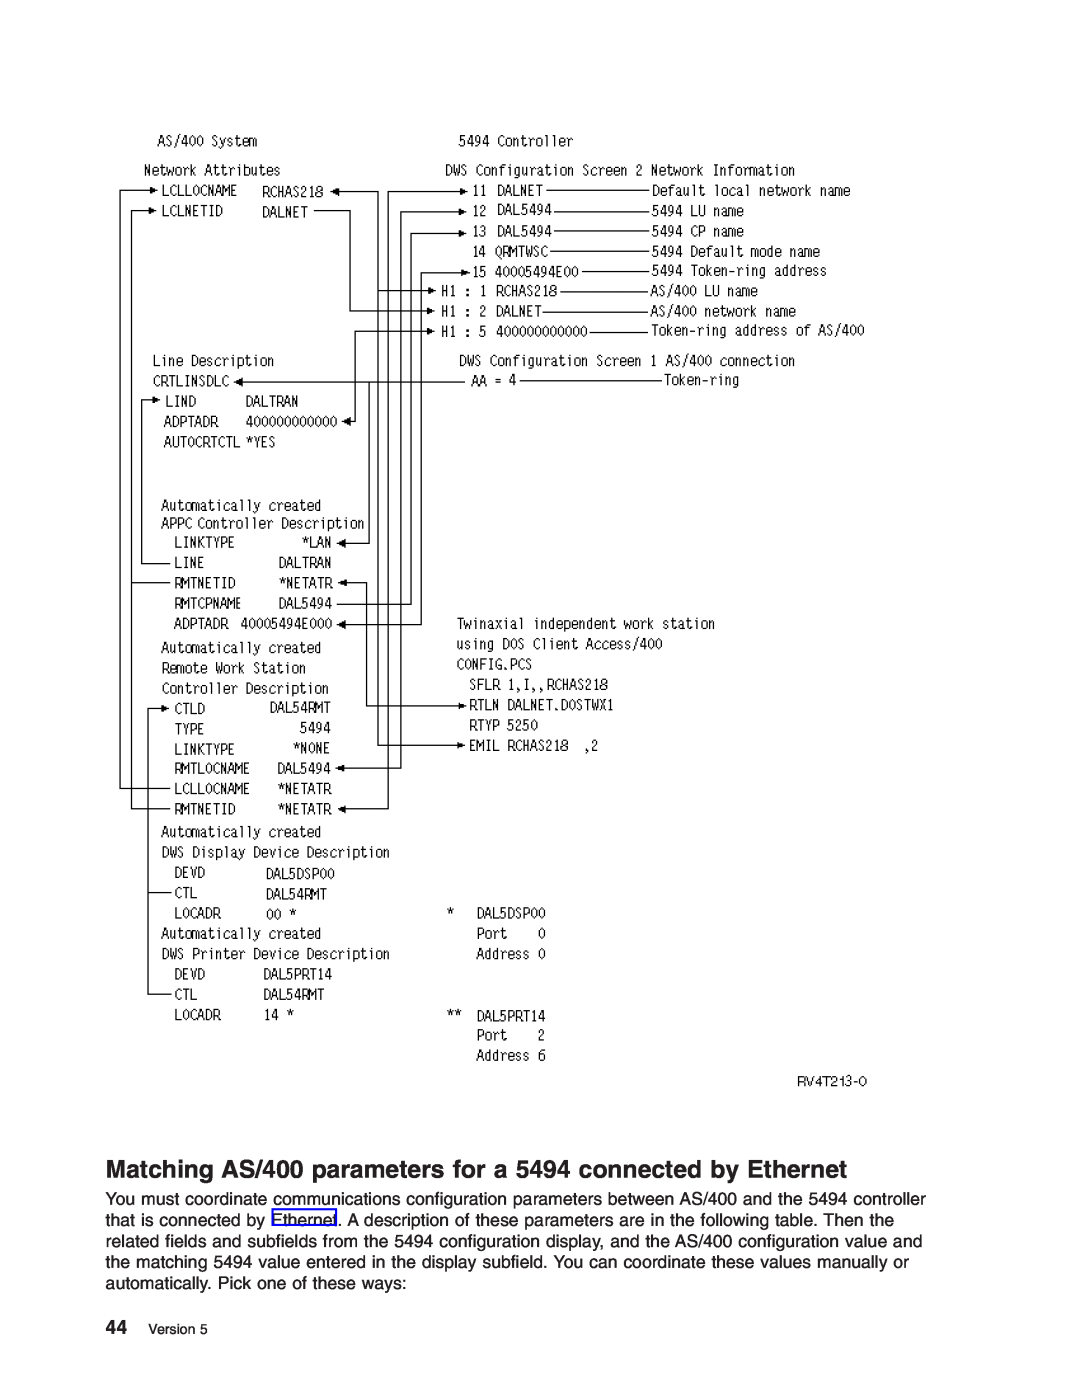 IBM manual Matching AS/400 parameters for a 5494 connected by Ethernet, Version 